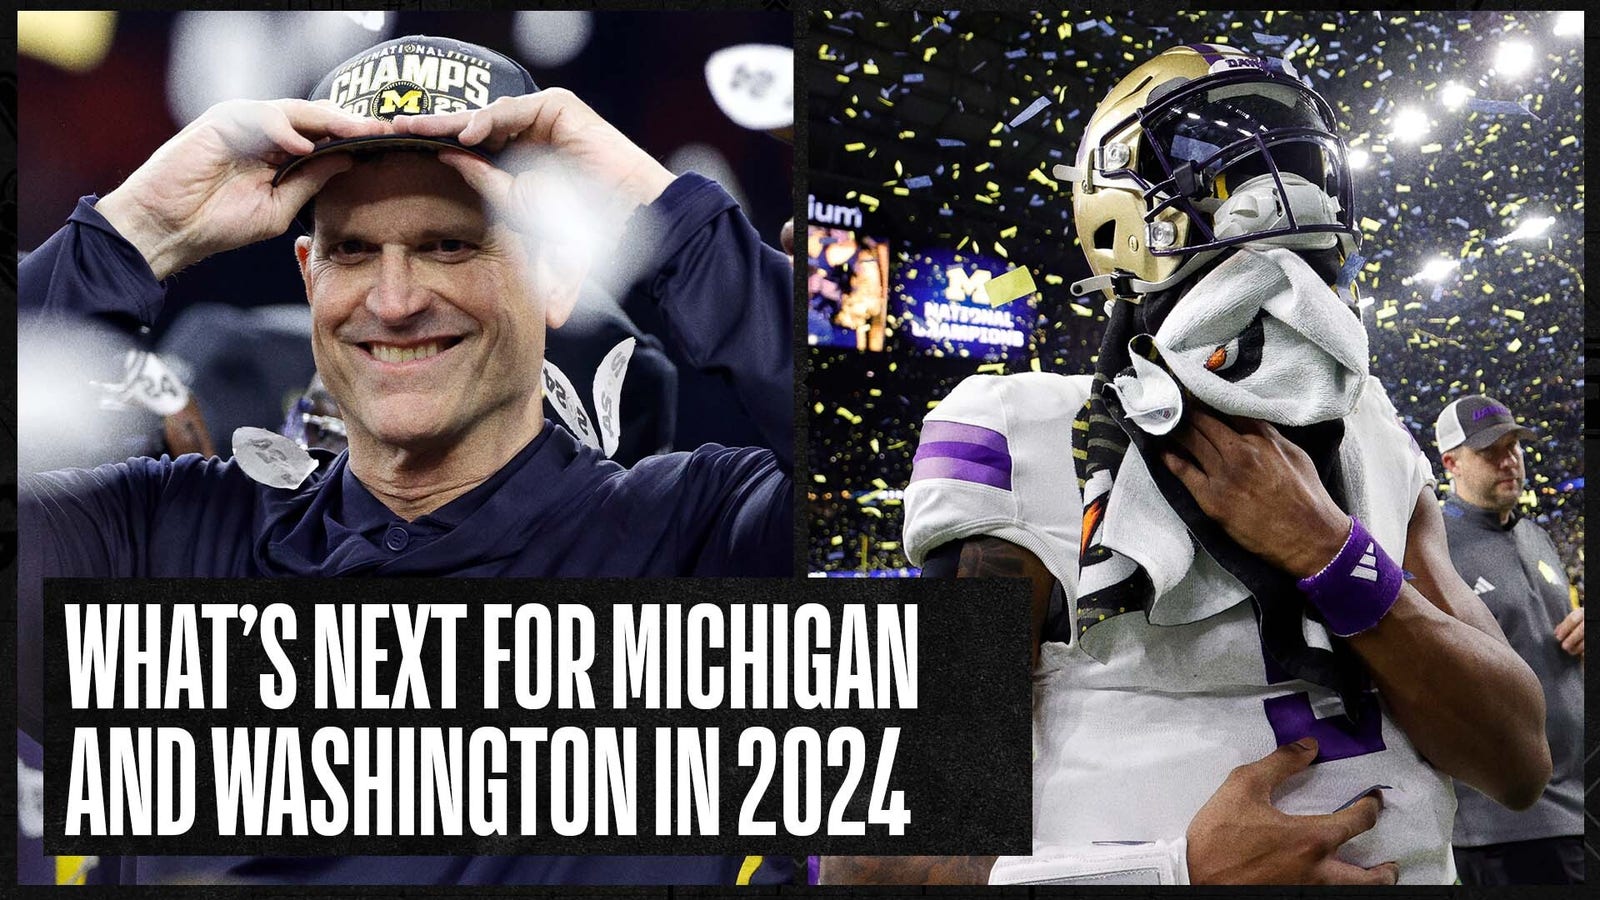 Where does Jim Harbaugh, Michigan and Washington go from here? | No. 1 CFB Show